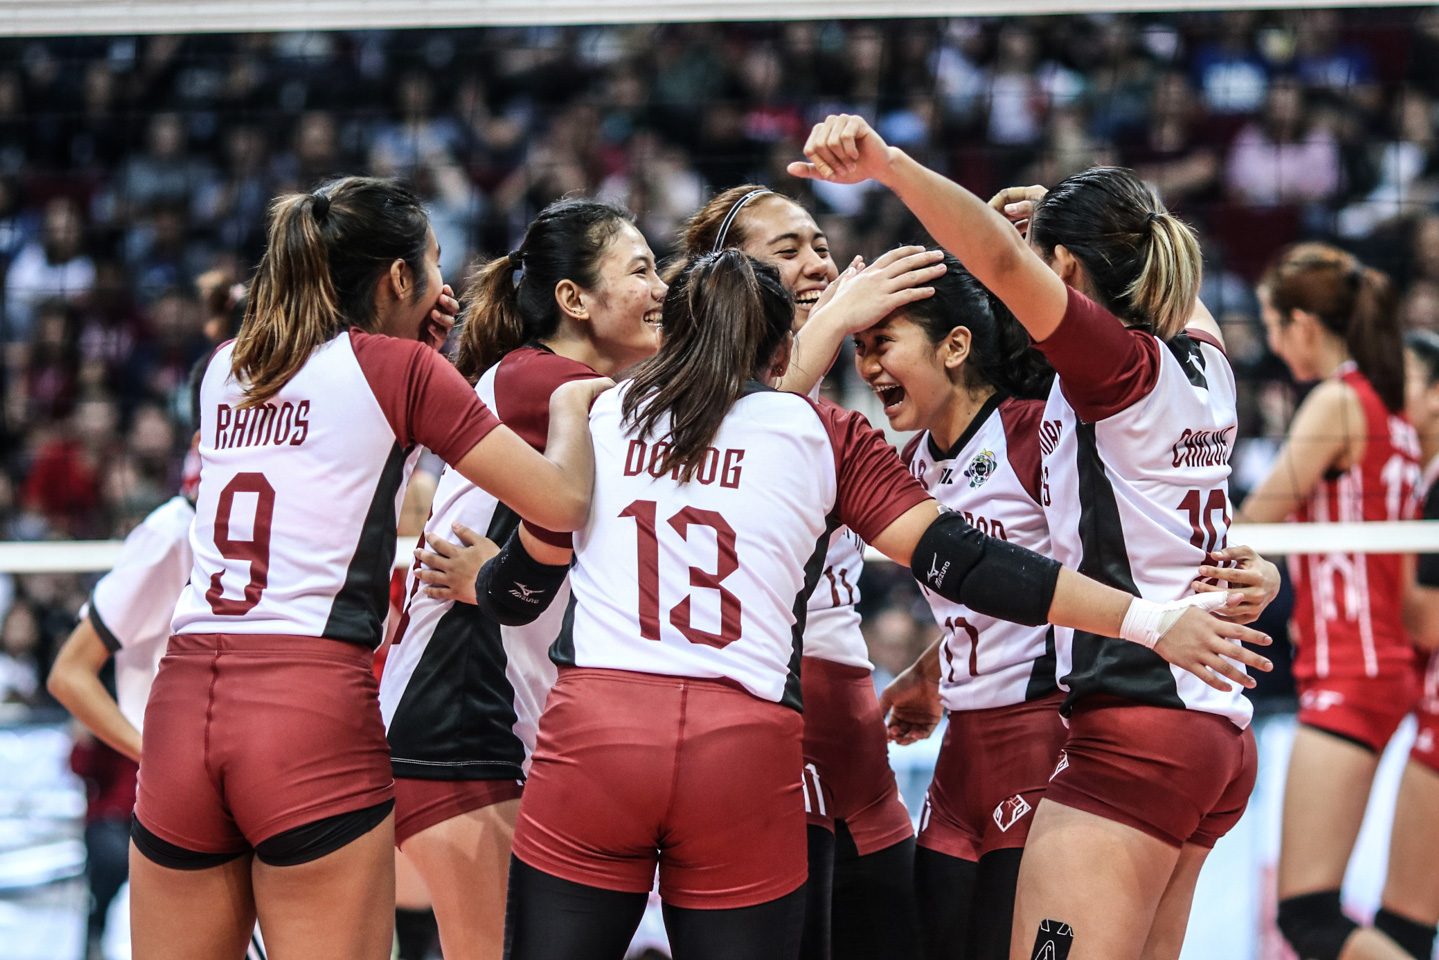 UP escapes UE’s threat in UAAP Season 80 volleyball opener